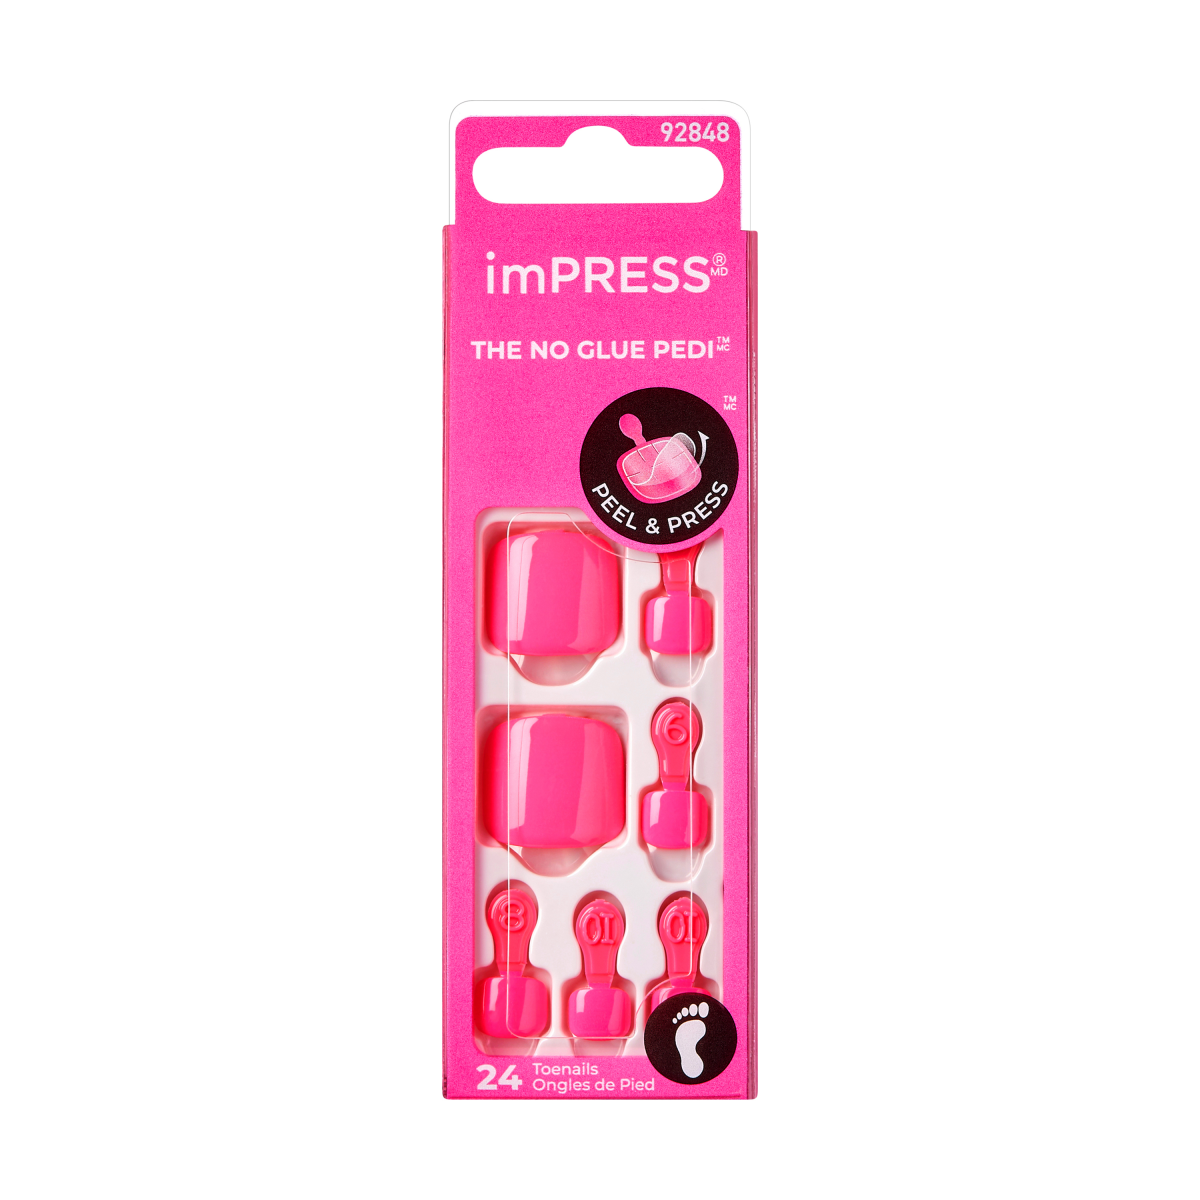 imPRESS Press-on-Pedicure - Time After Time